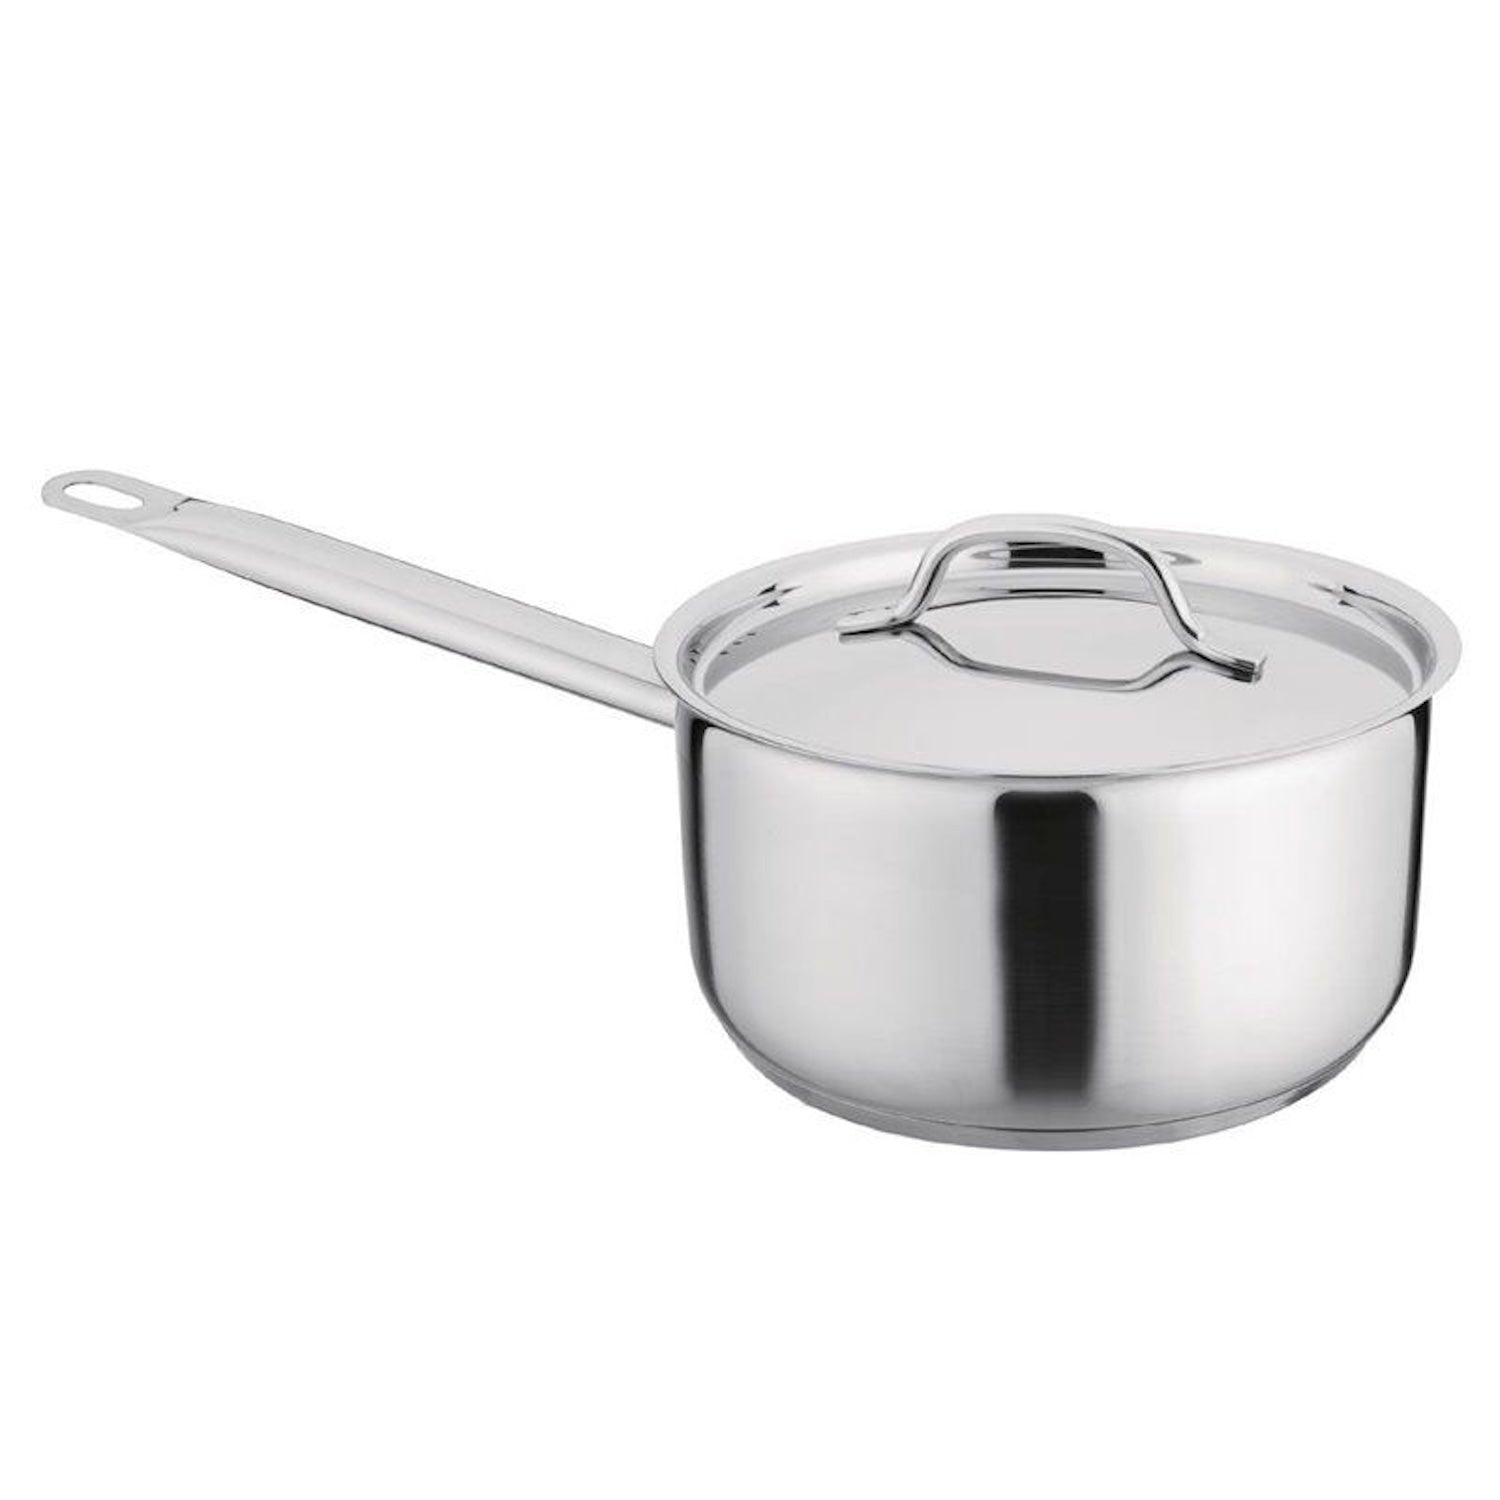 Saucepan with Lid | 1500ml | Stainless Steel